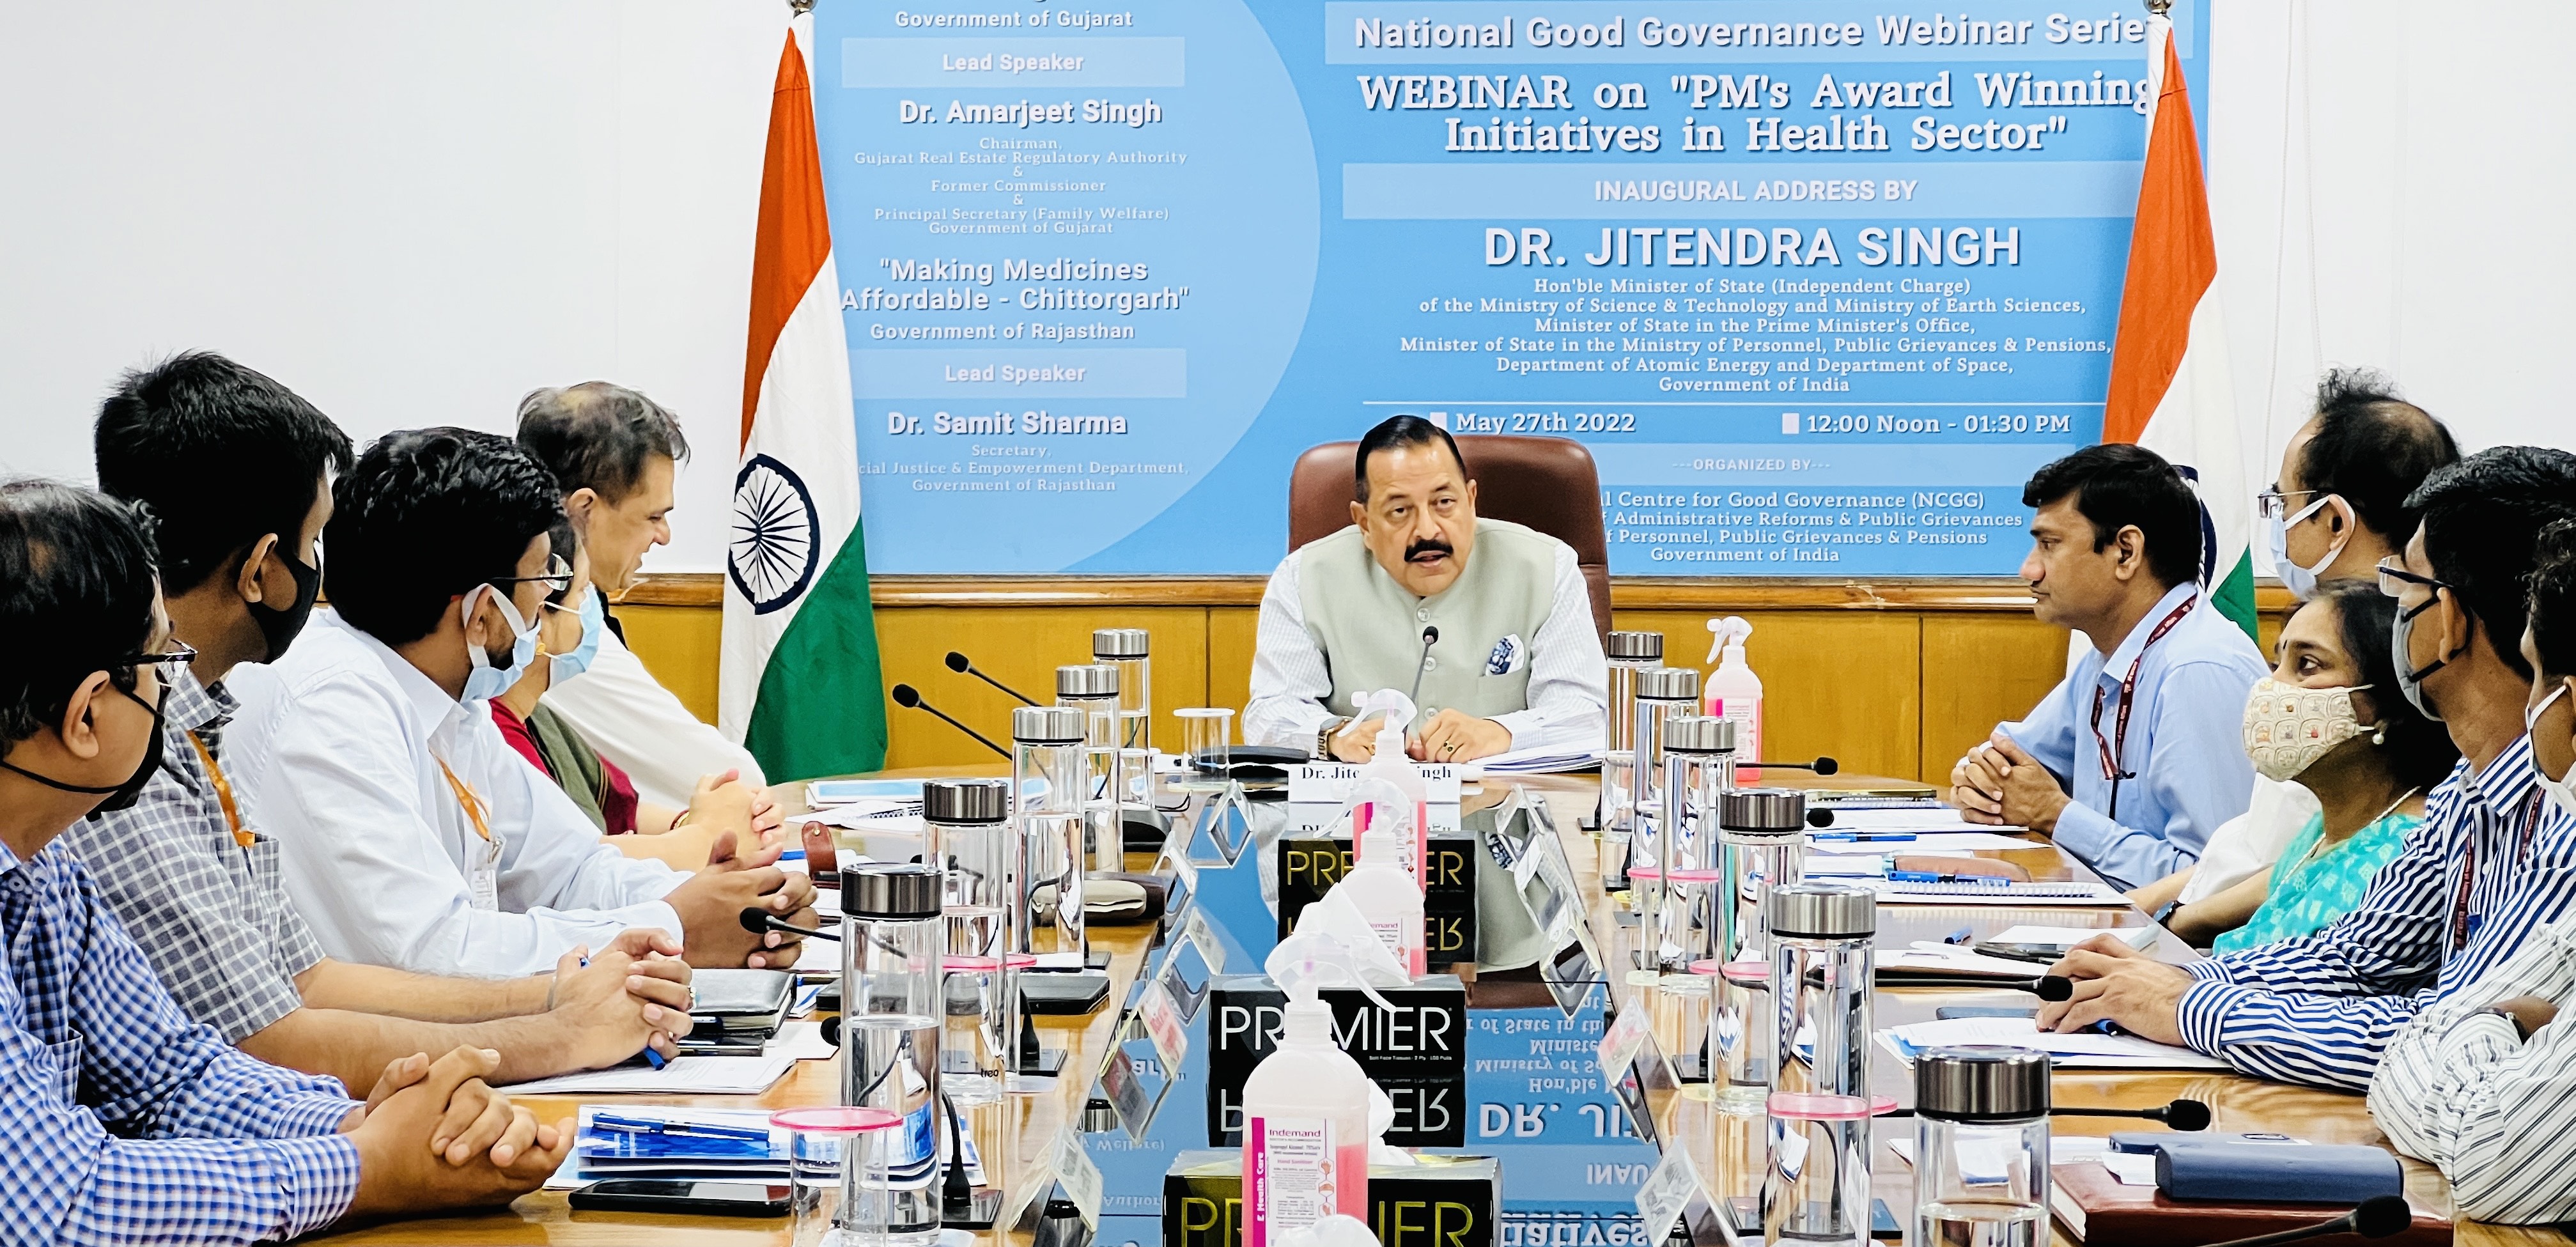 Union Minister Dr Jitendra Singh says, best governance practices come from innovative ideas: civil servants need to focus on innovative ideas having replicability and sustainability which can be used as best governance practices